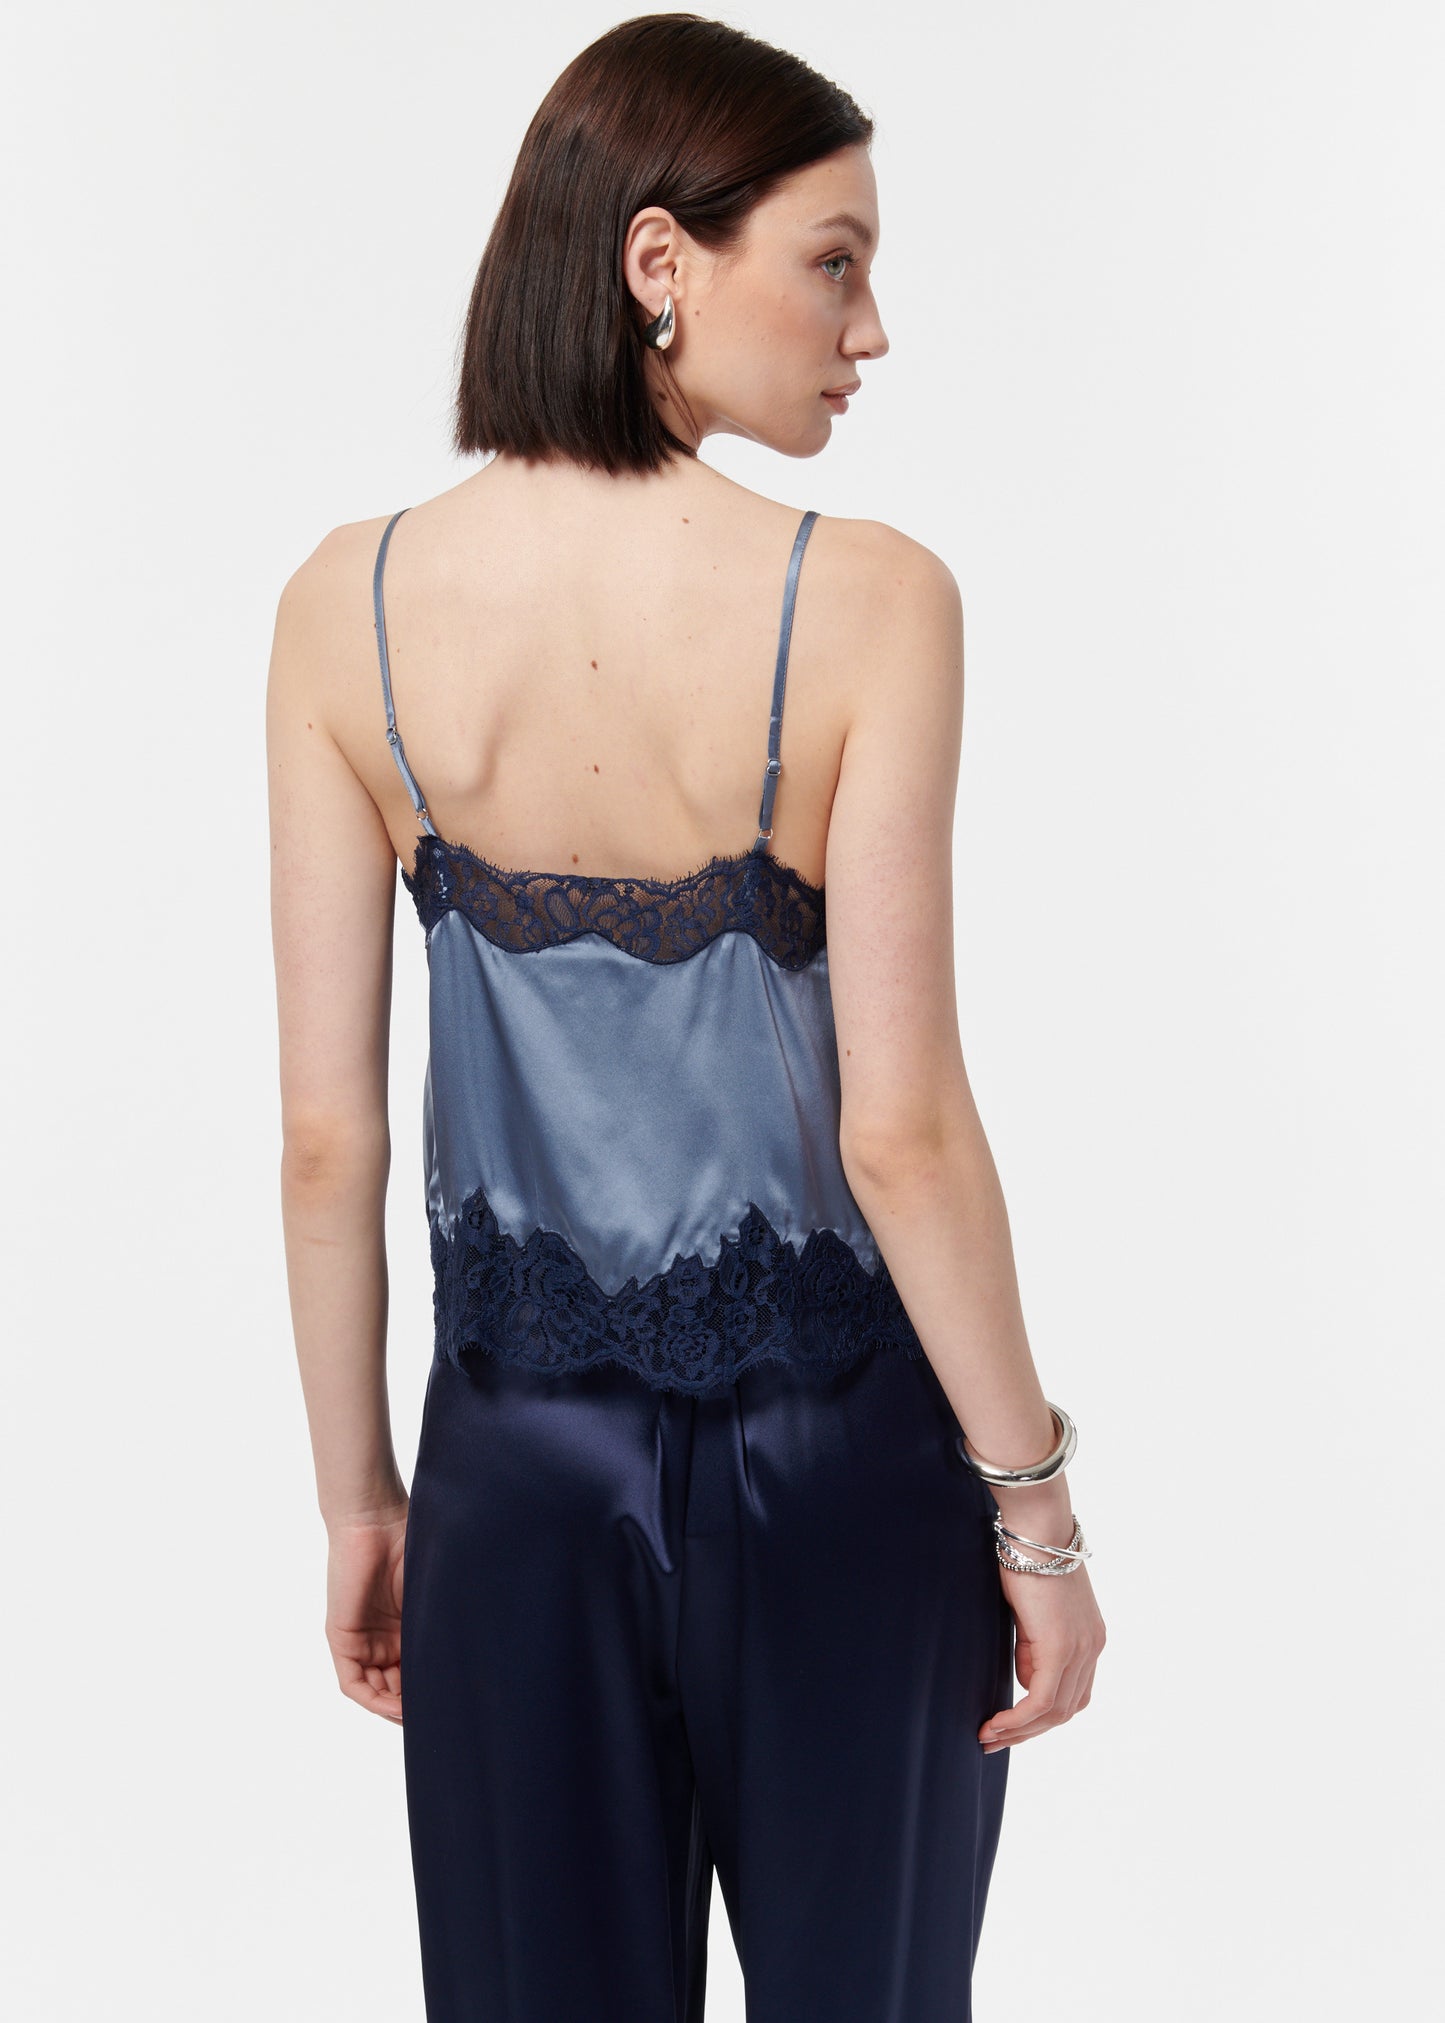 Cami NYC Annette Cami, Blue